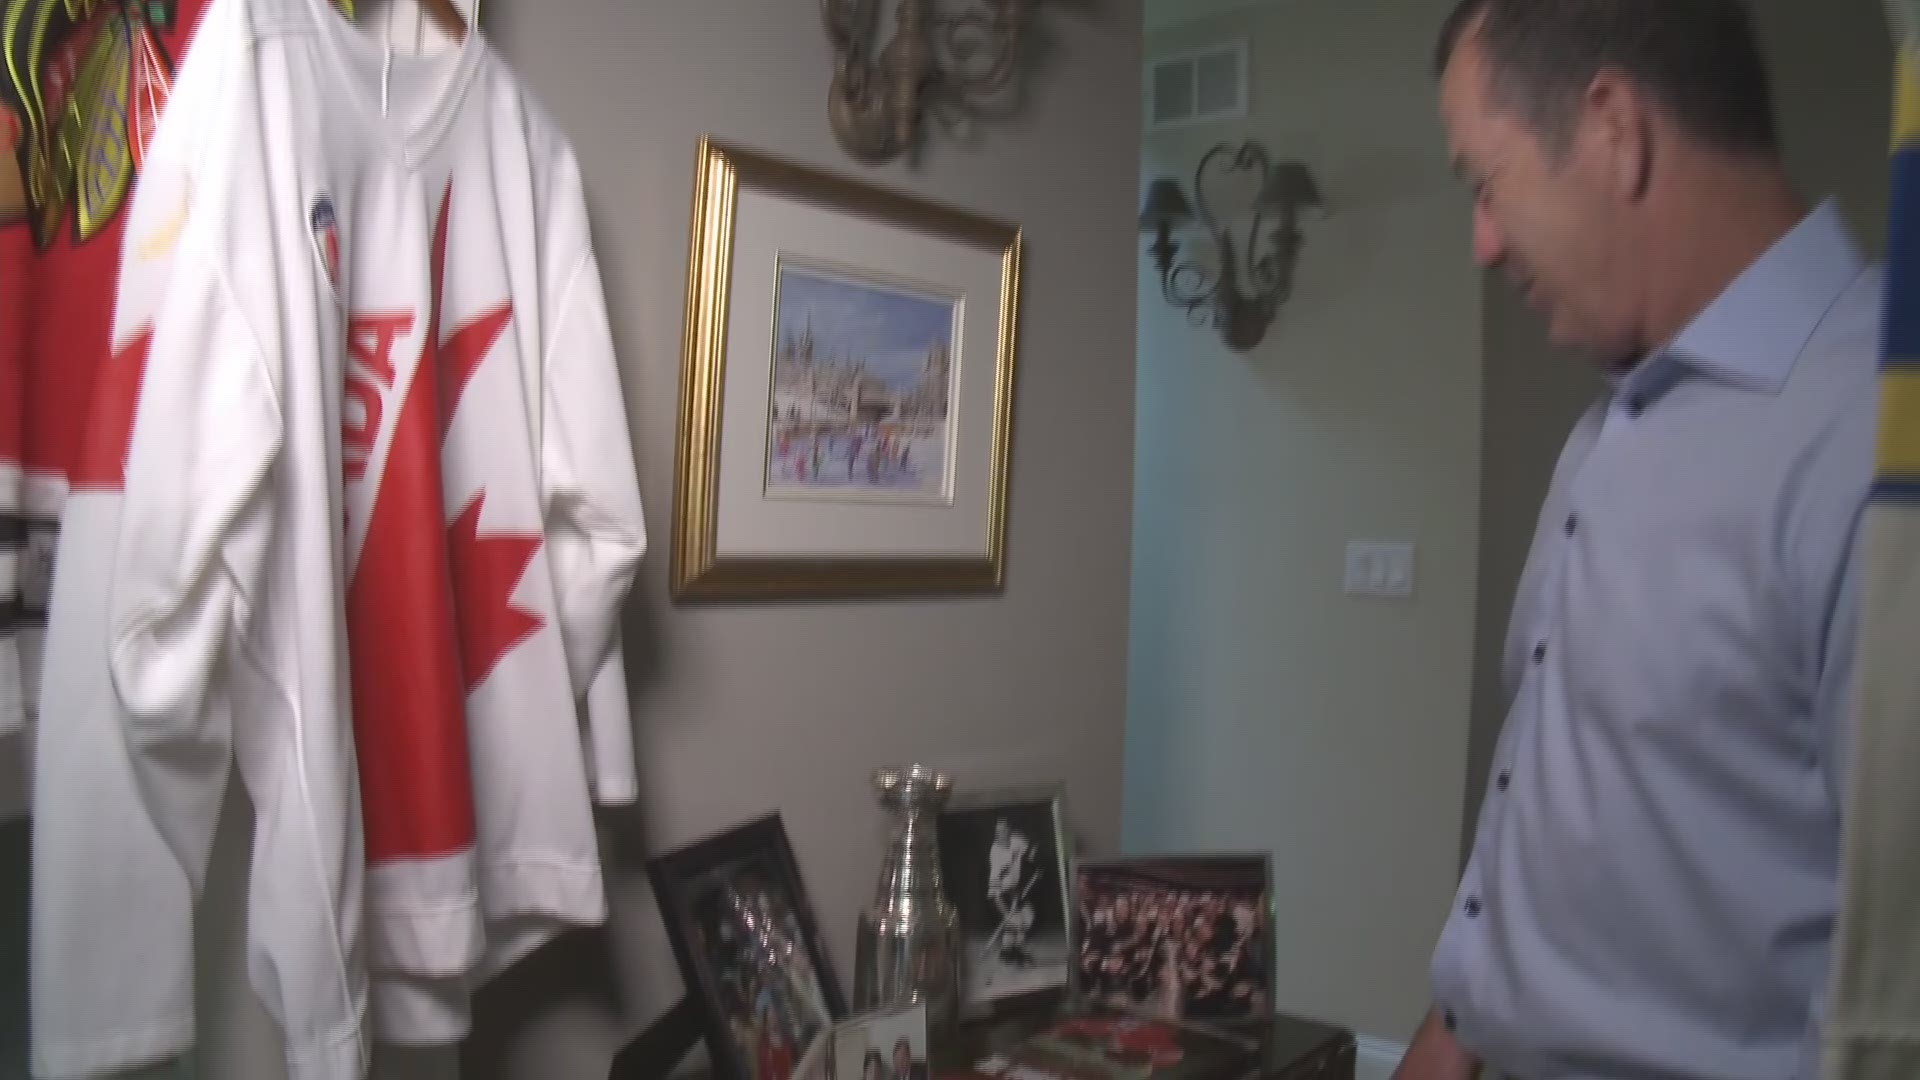 Former Hartford Whaler and Portland Pirates coach Kevin Dineen shows off some of his most treasured memorabilia, including the jersey of his "favorite and most respected" Boston Bruins player.